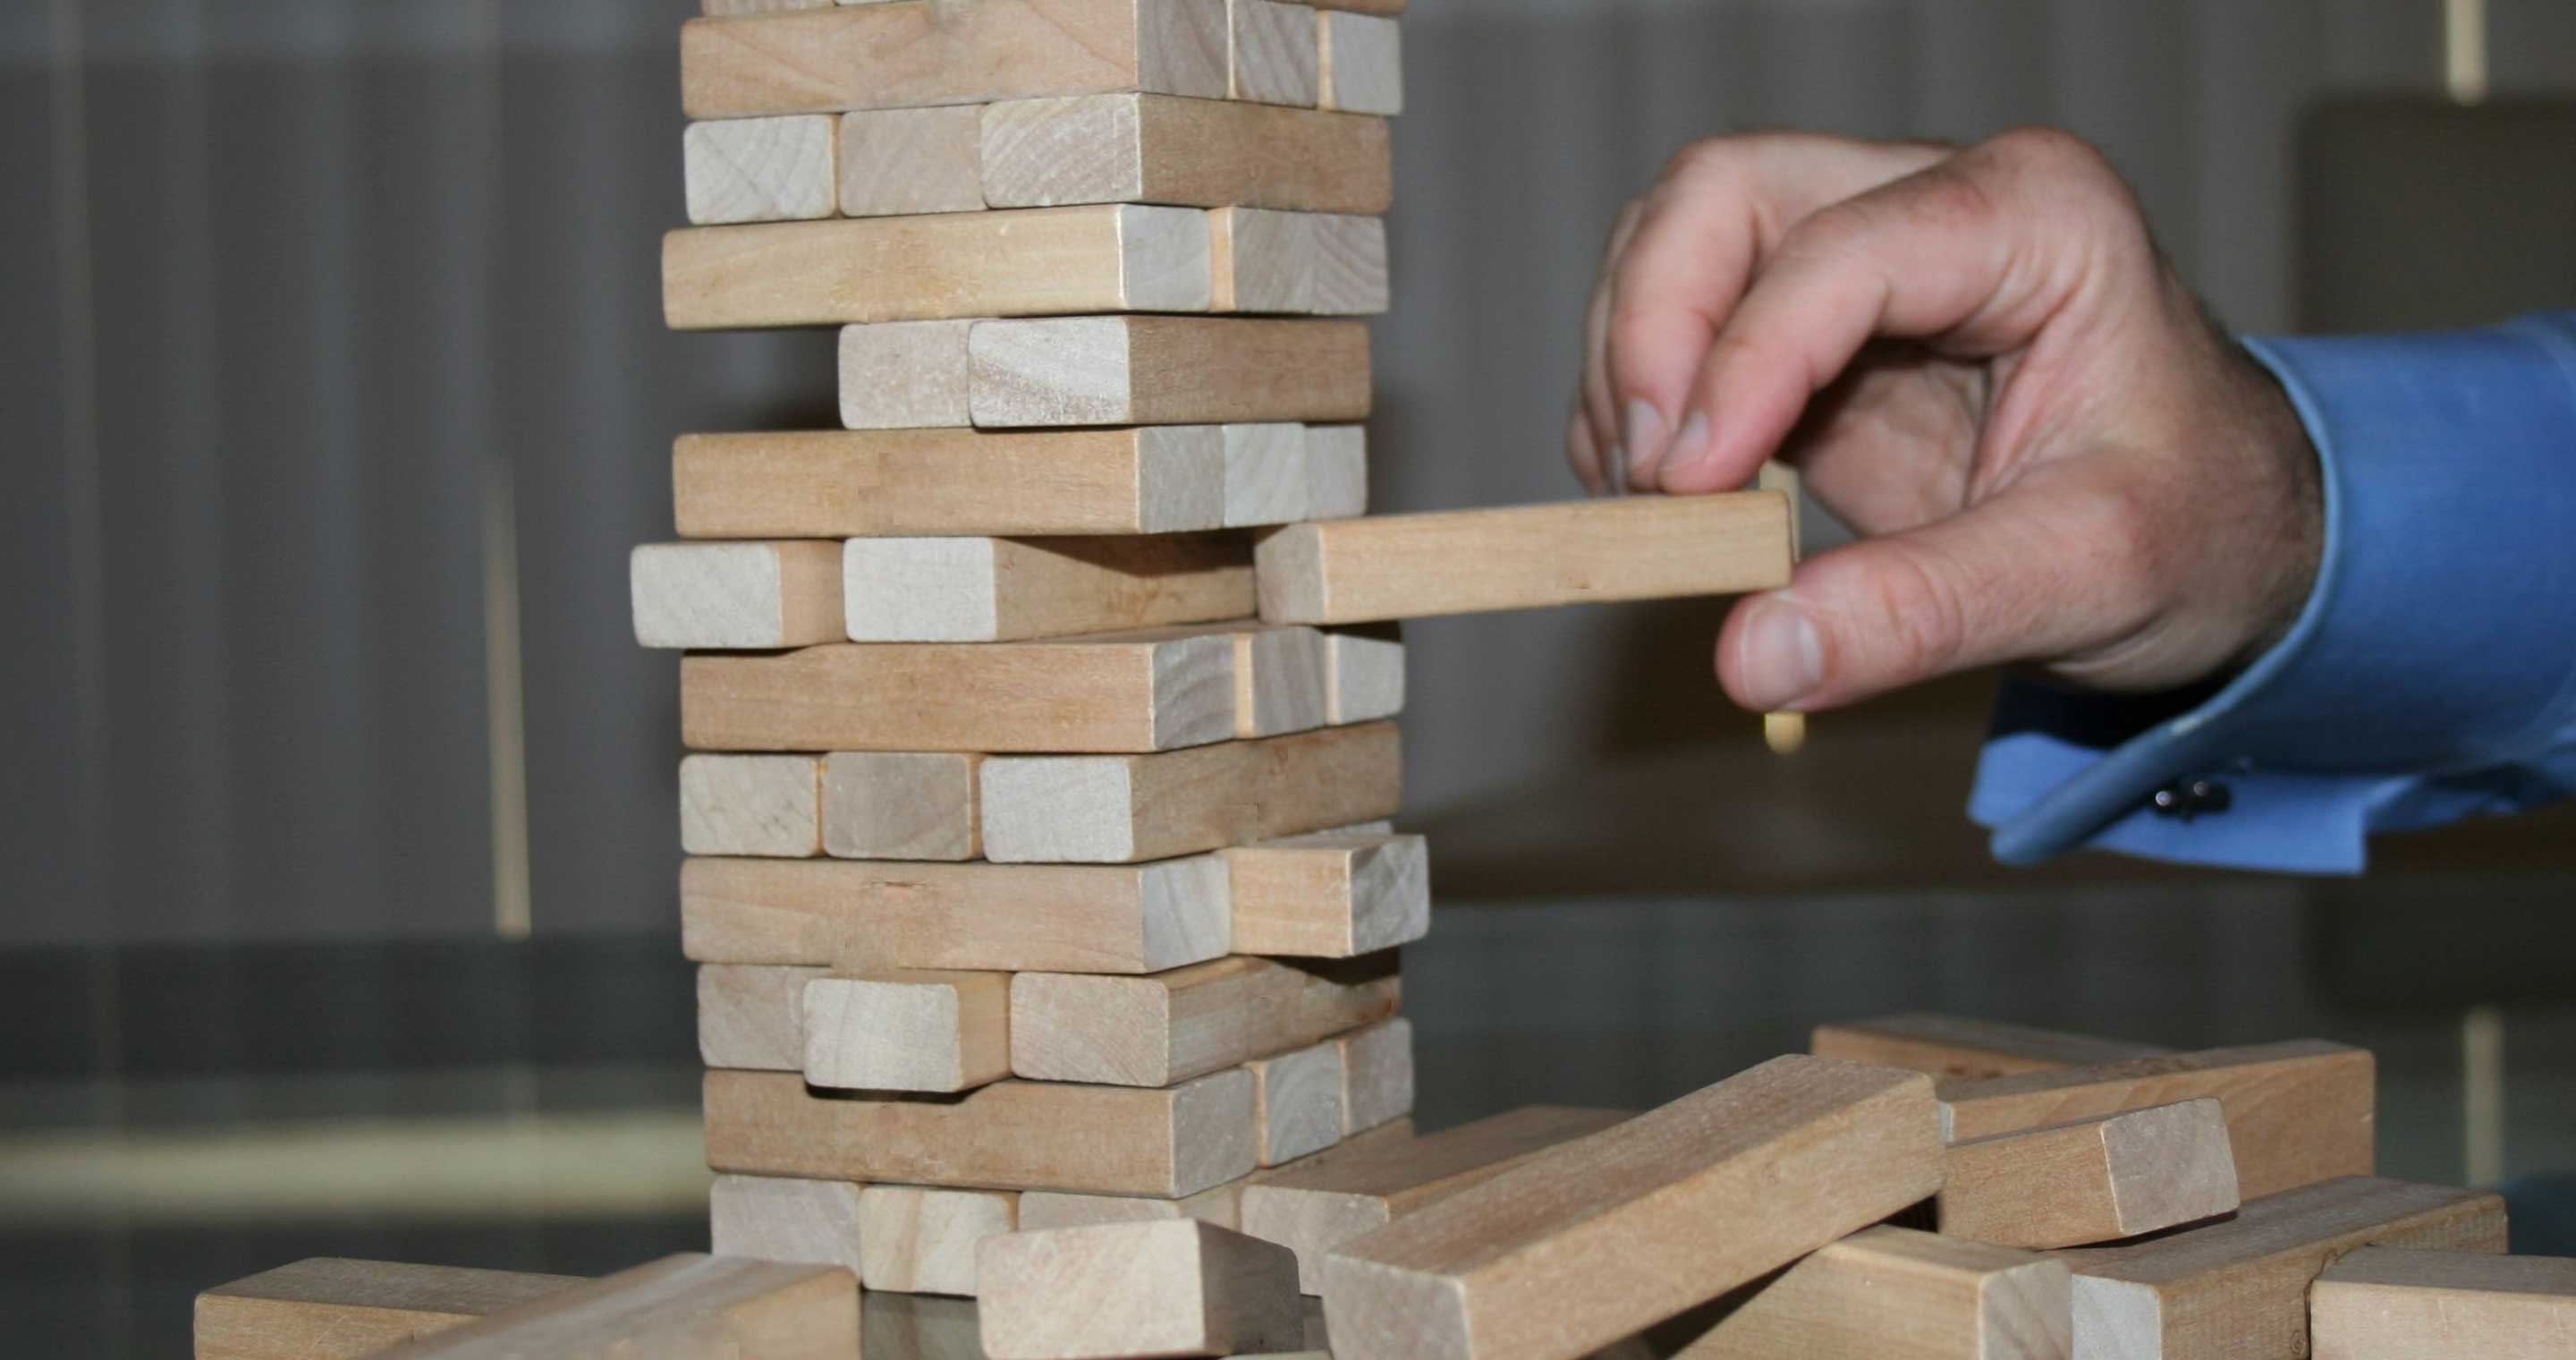 a hand placing a block on a tower of wooden blocks